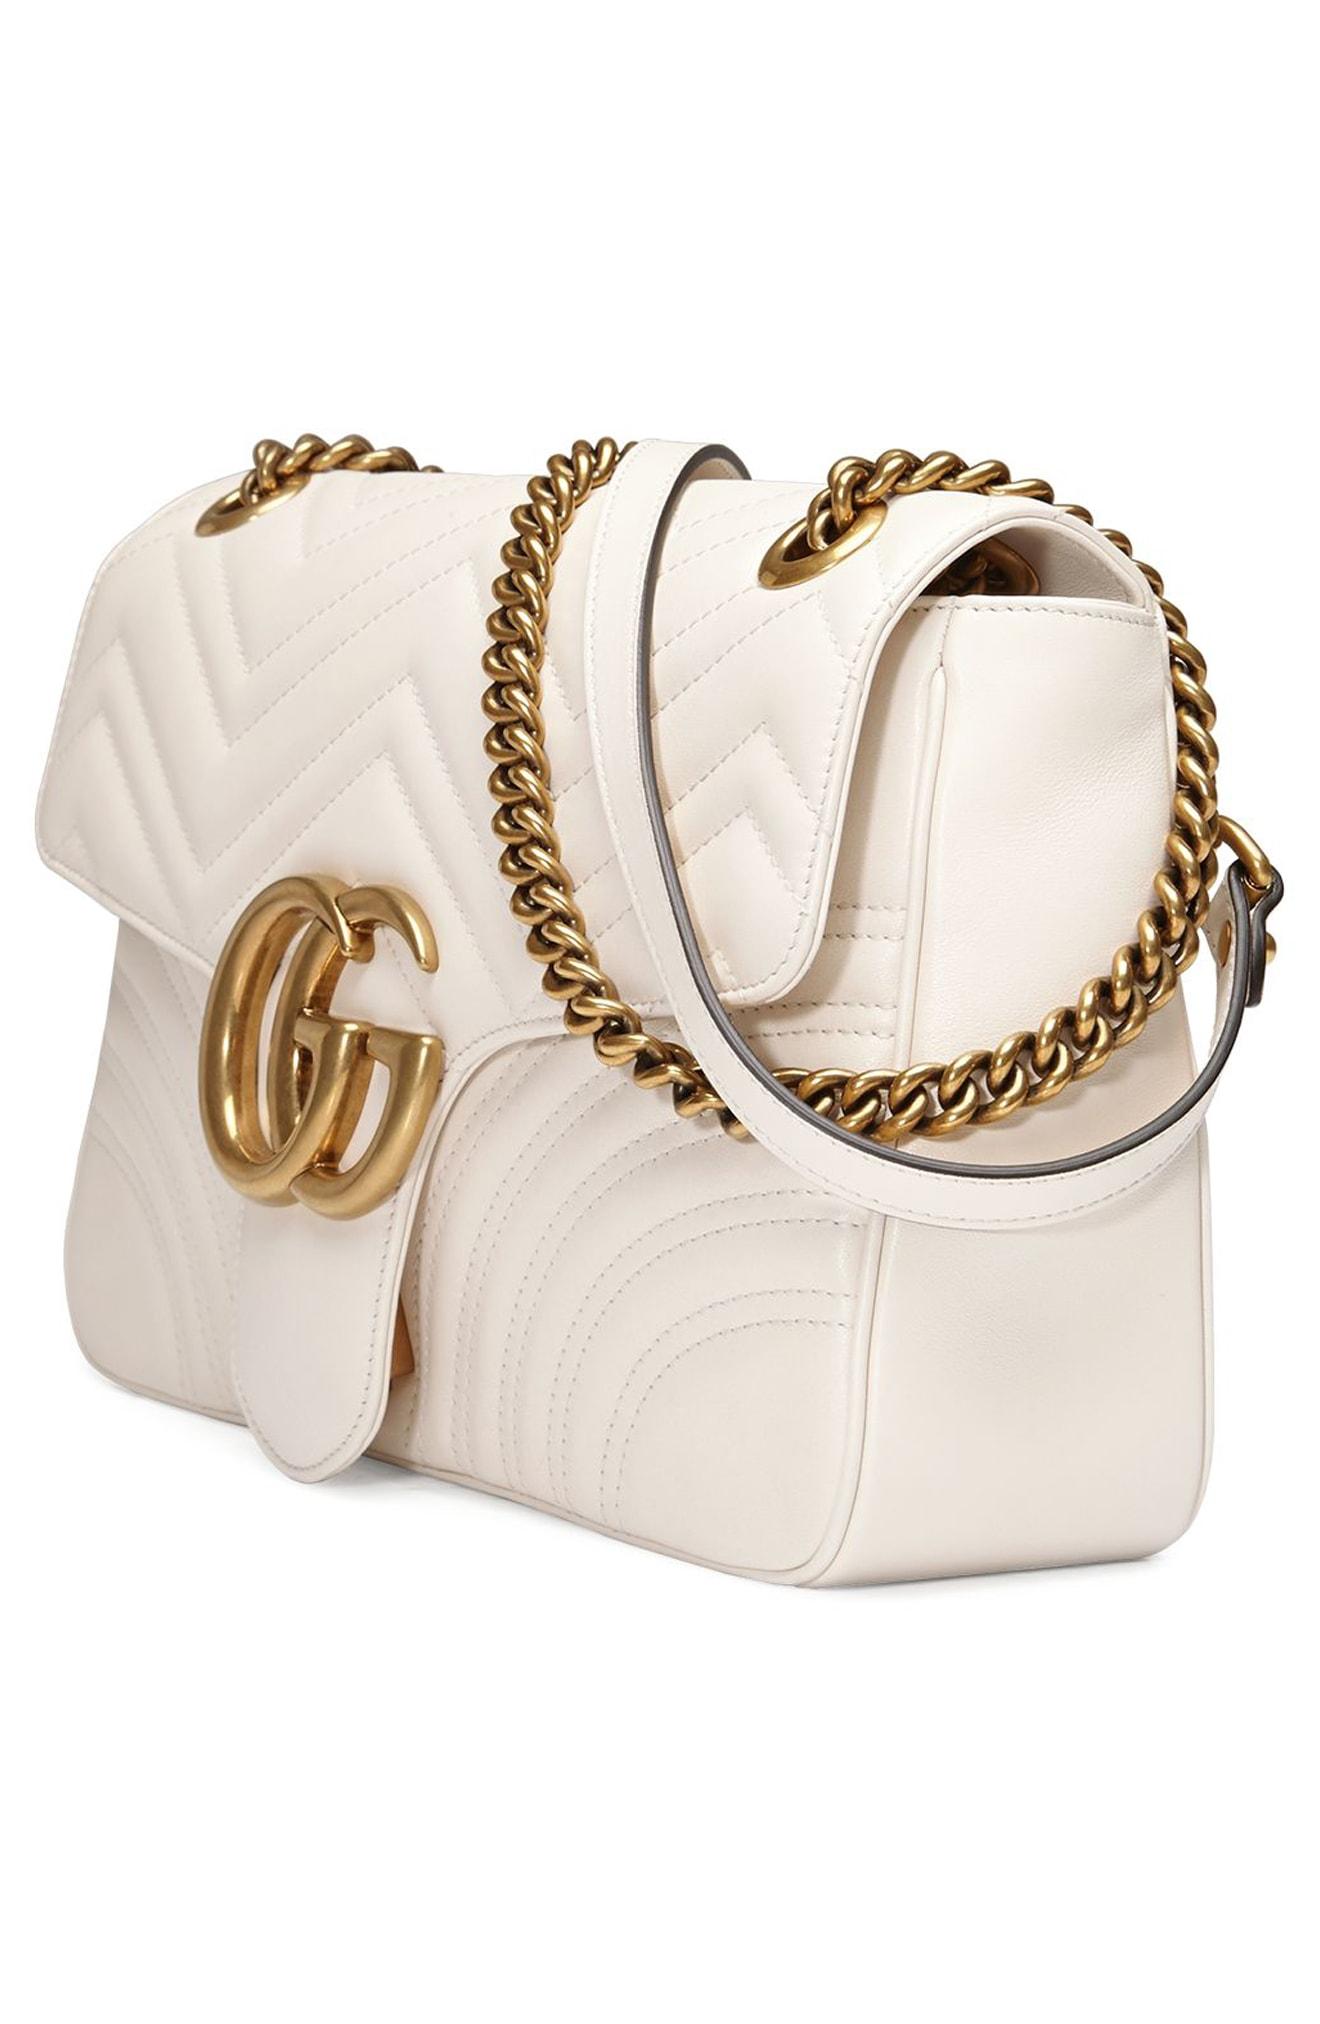 Gucci Gg Large Marmont 2.0 Matelasse Leather Shoulder Bag - White In Mystic White | ModeSens